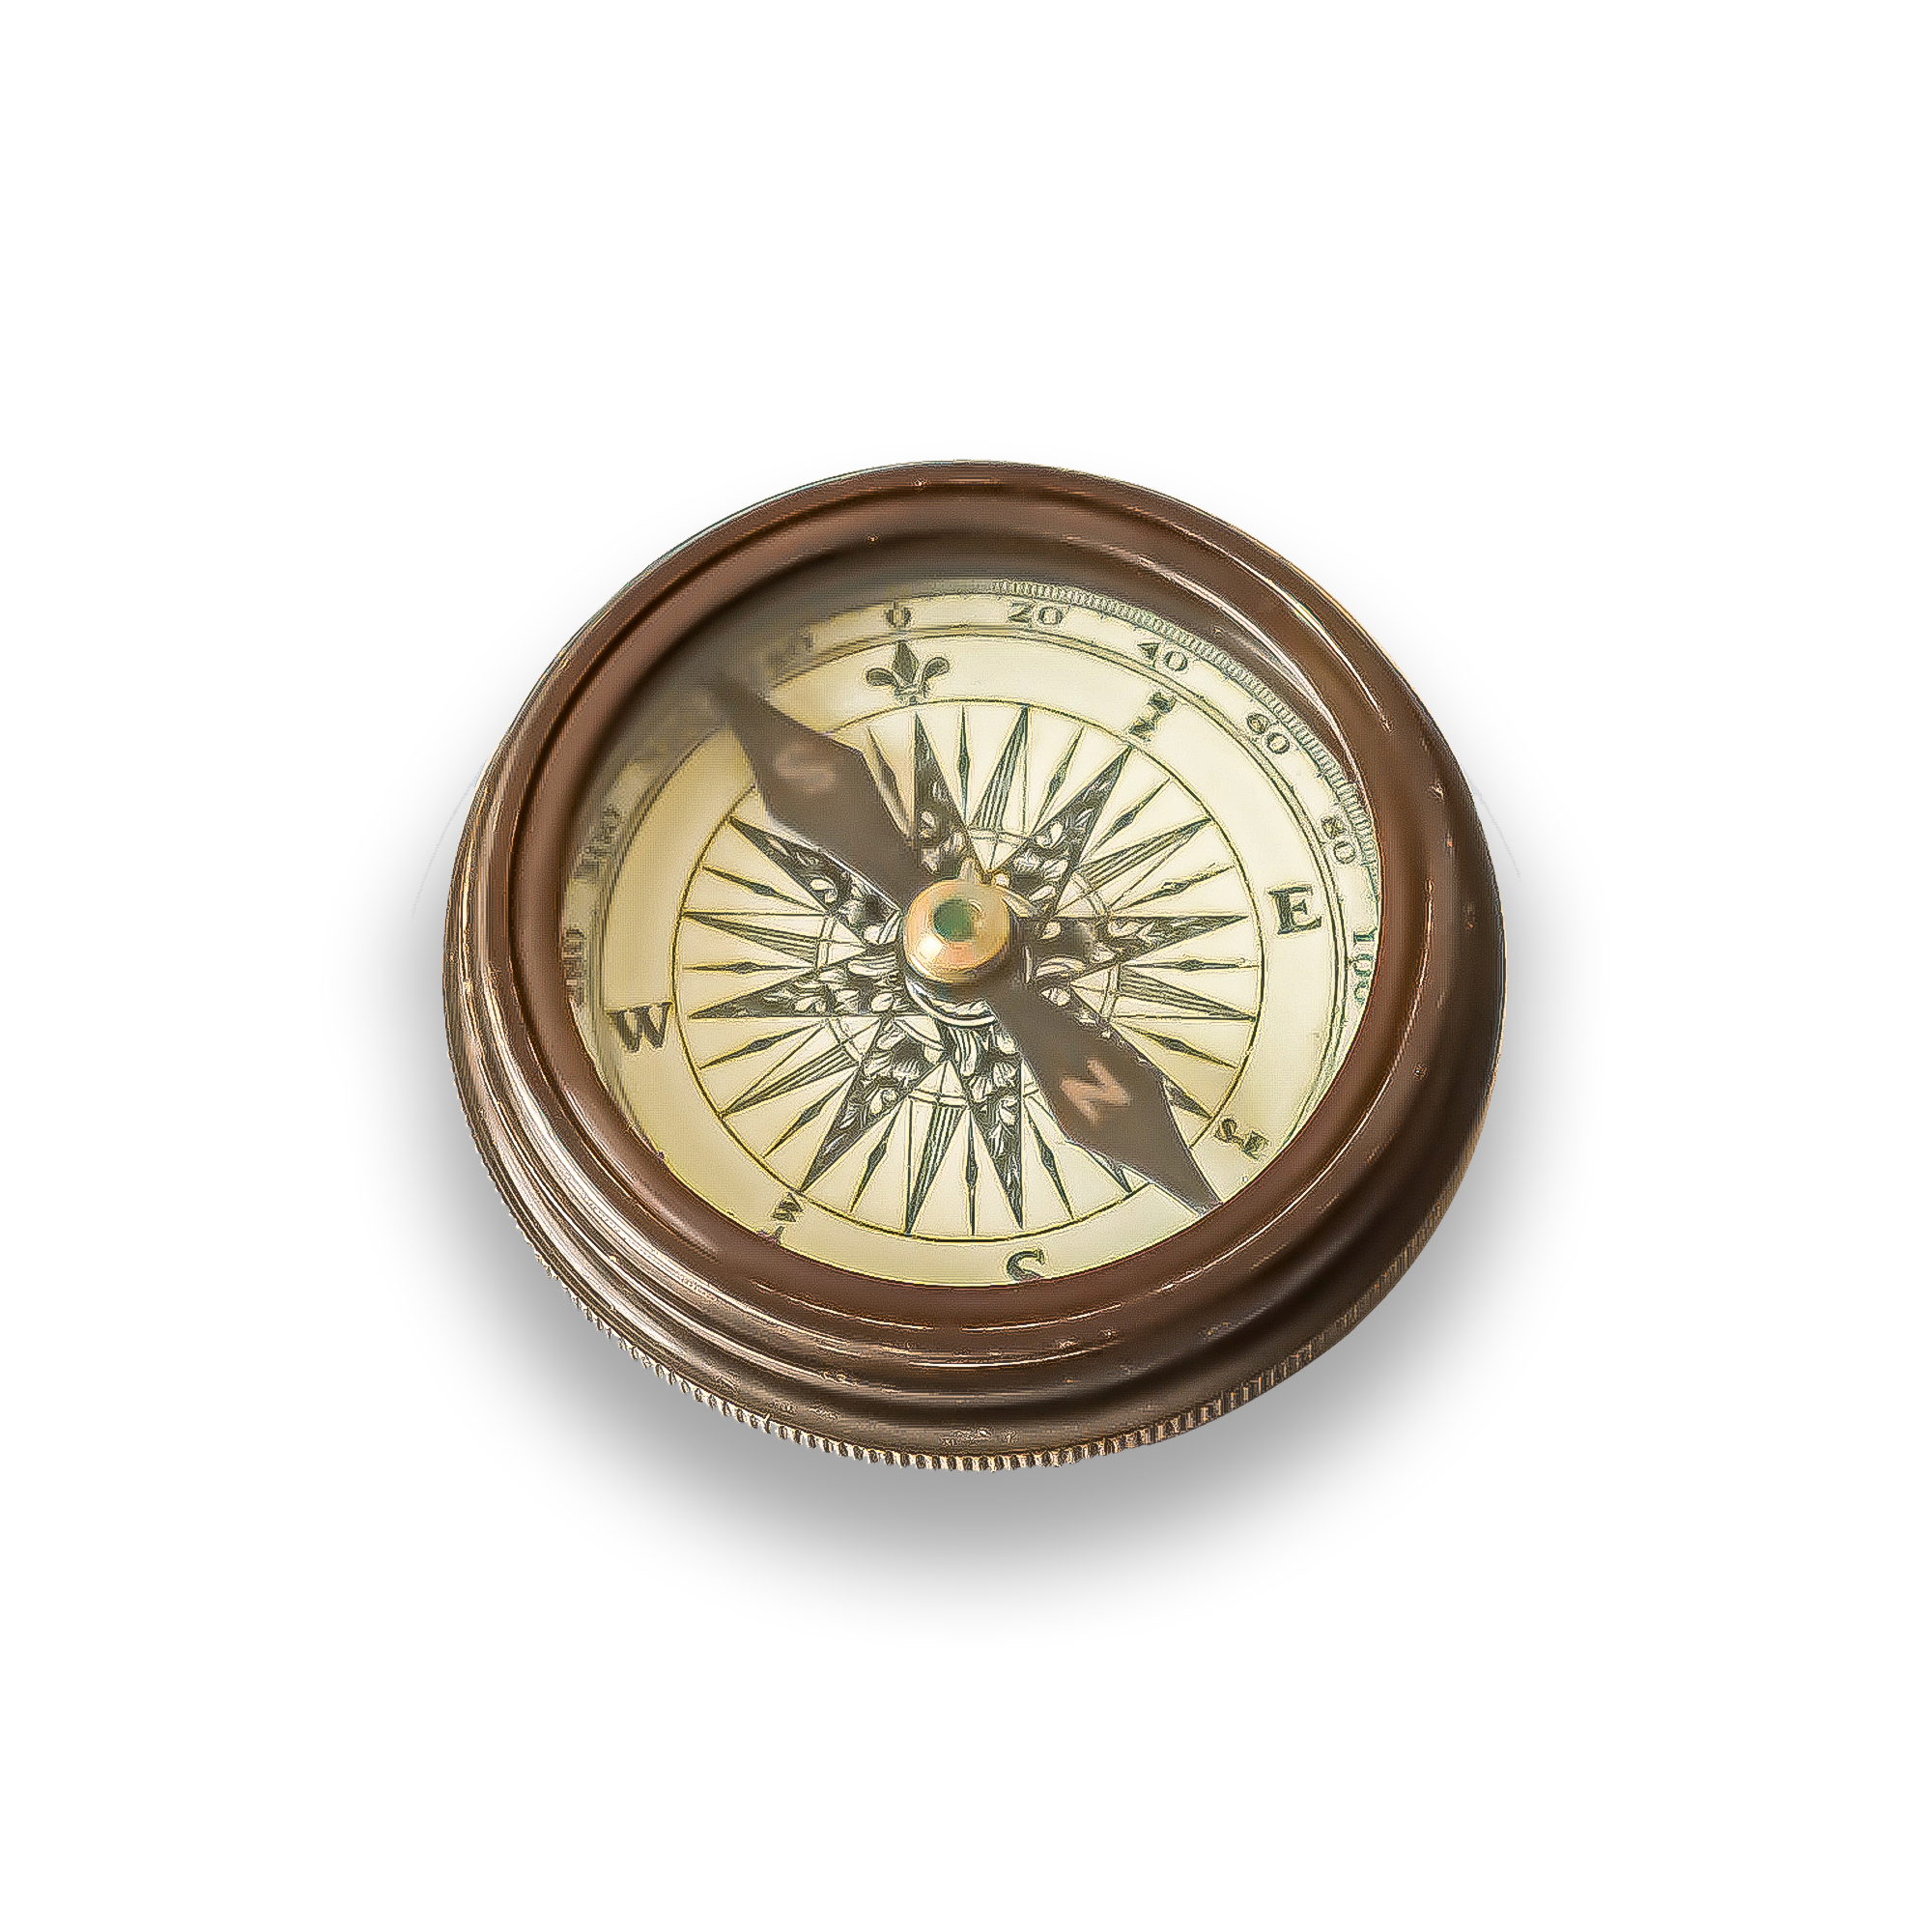 Brass Poem Compass Maritime Antique Compass Maps Personalized Custom Engraving Perfect Travel Compass